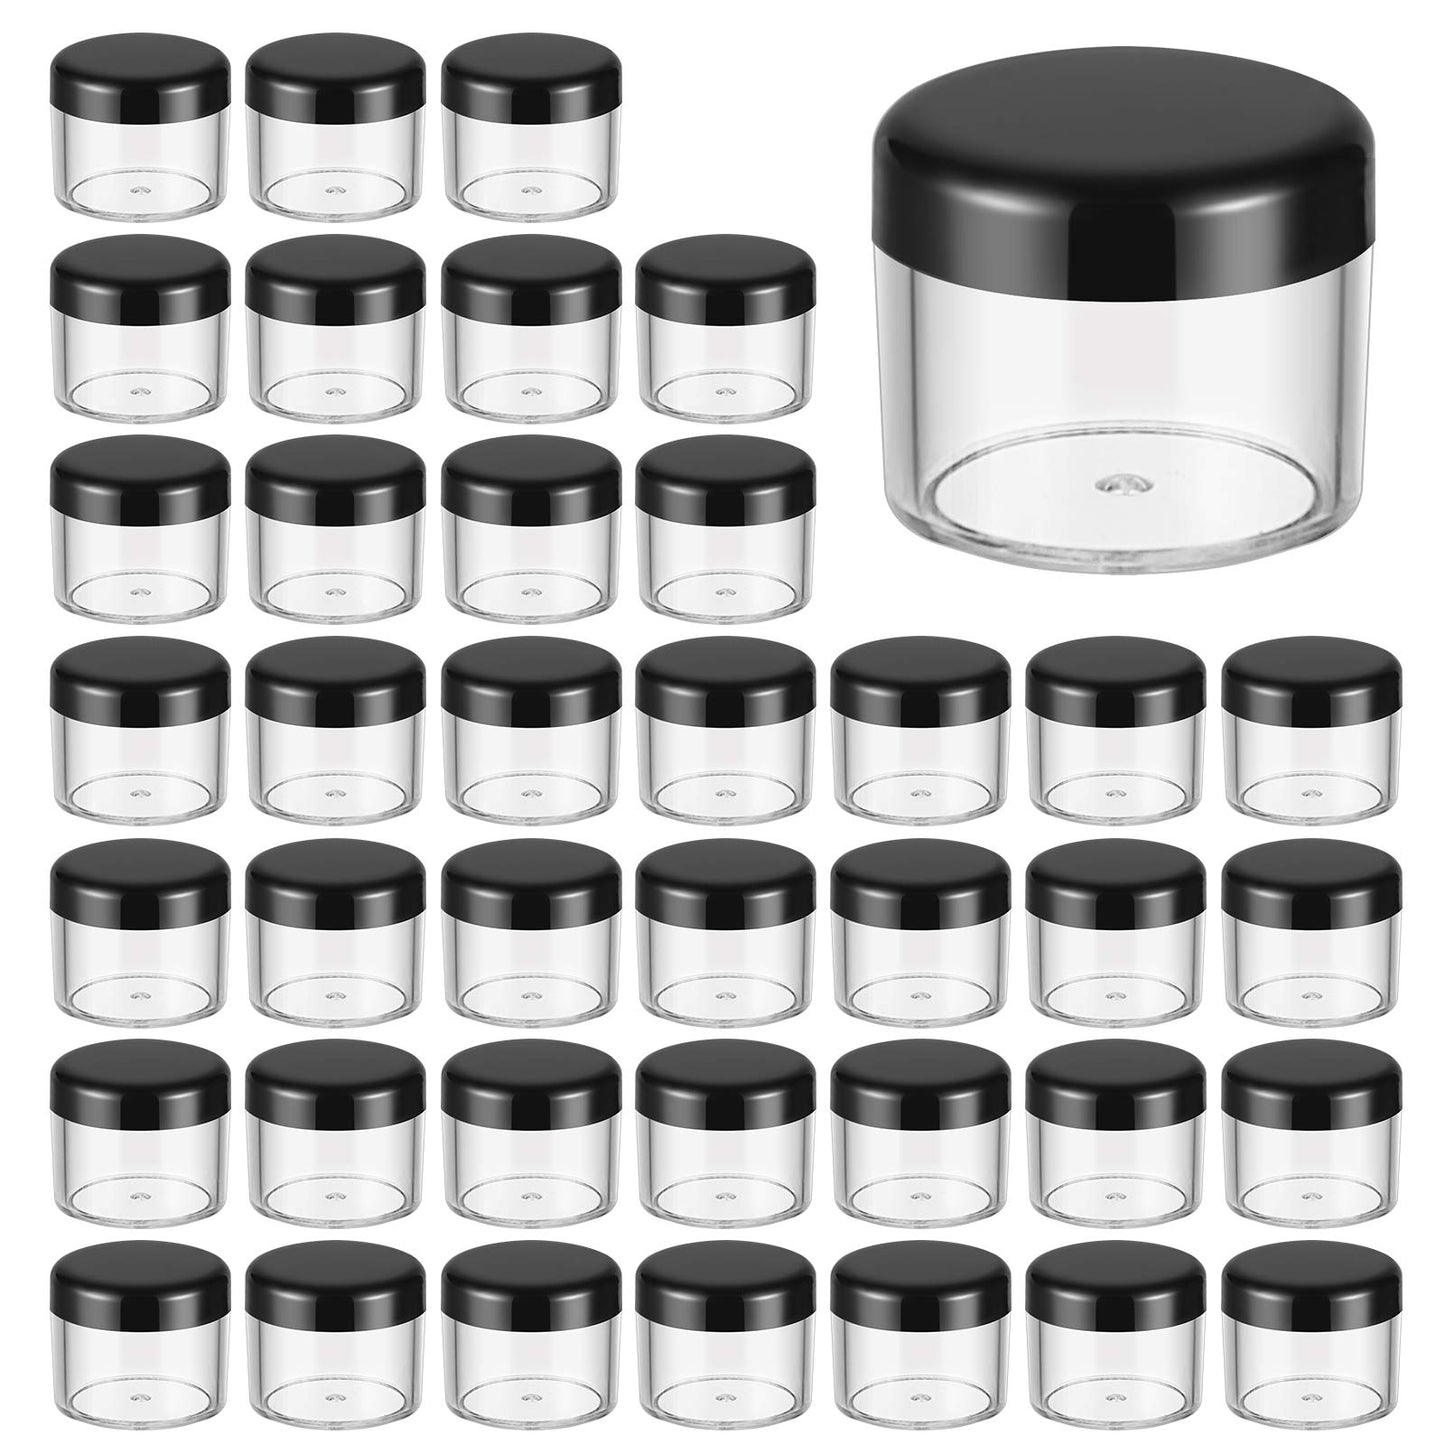 40PCS Plastic Cosmetic Containers Transparent storage tank with screw cap Storage Jars be used for Clay, Liquid,Sample ，20 ml/ 0.7 oz (black lid)